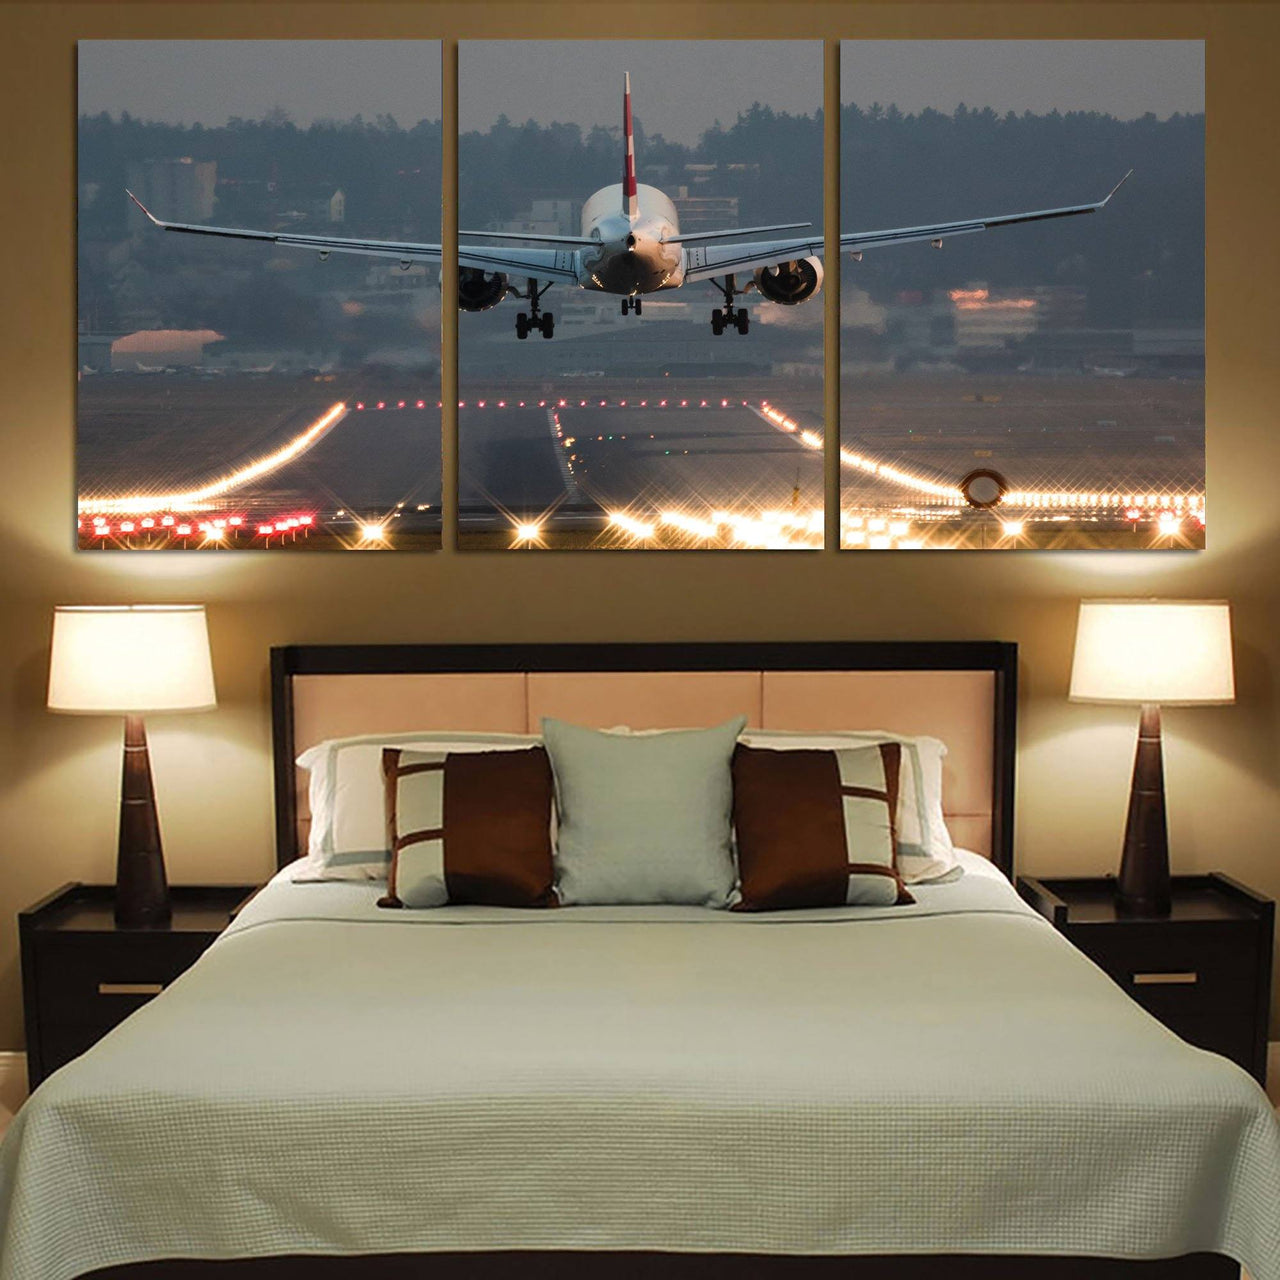 Magnificent Airplane Landing Printed Canvas Posters (3 Pieces) Aviation Shop 